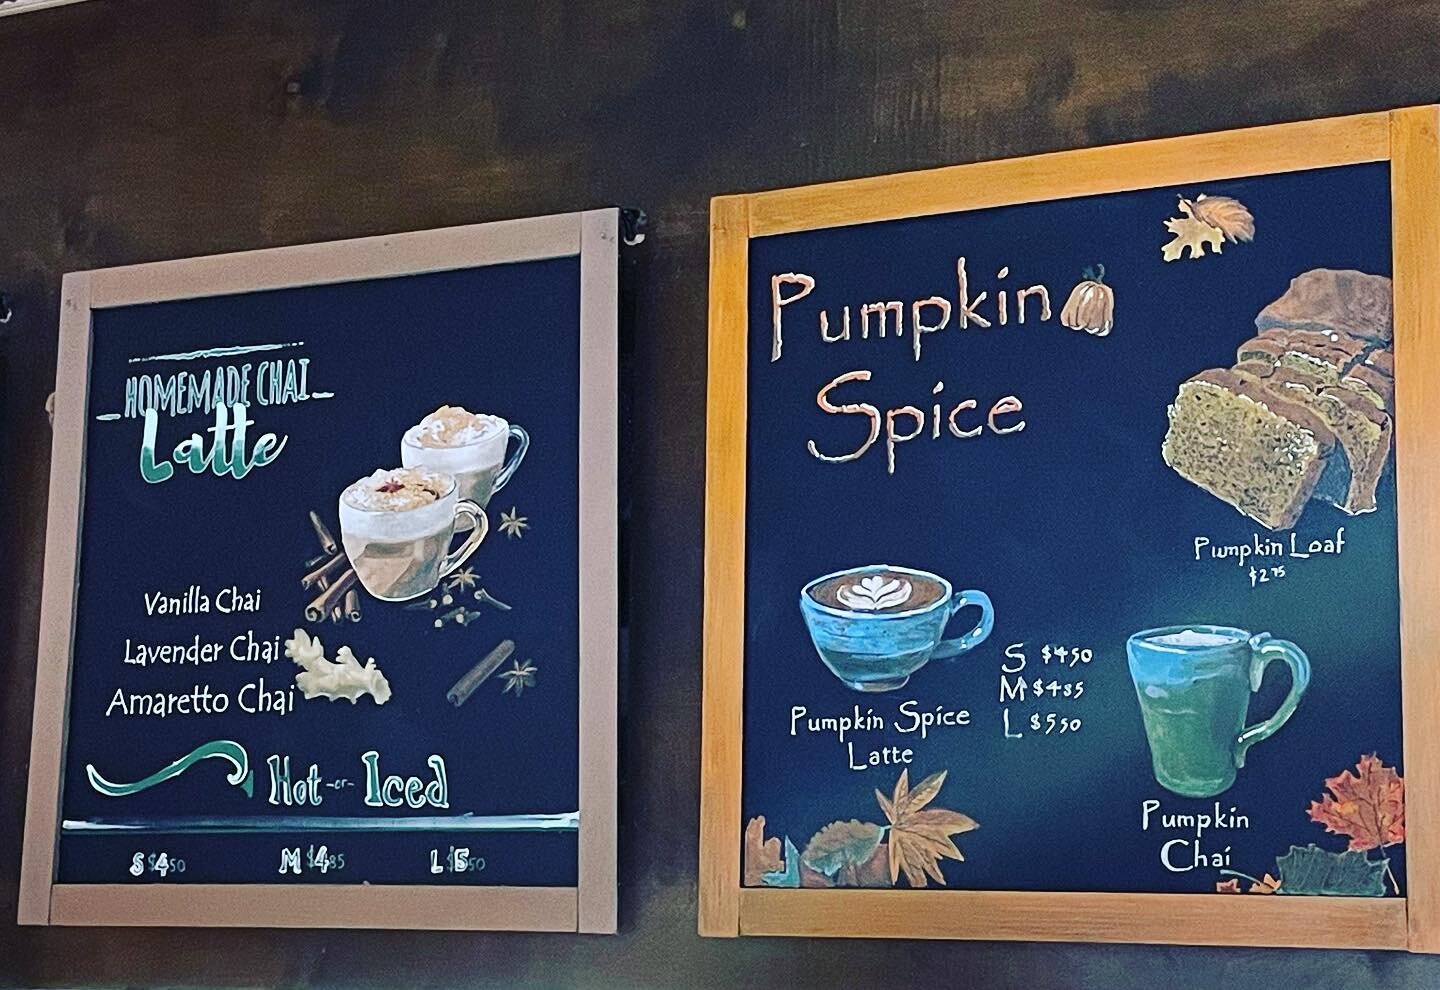 Sri says it&rsquo;s Chai Time, so our Pumpkin Spice menu board has a new neighbor. 

Try our new Vanilla Chai, Lavender Chai, or Amaretto Chai the next time you&rsquo;re in the shop. Iced or hot. You choose.

We&rsquo;re open daily from 6am-6pm. Come